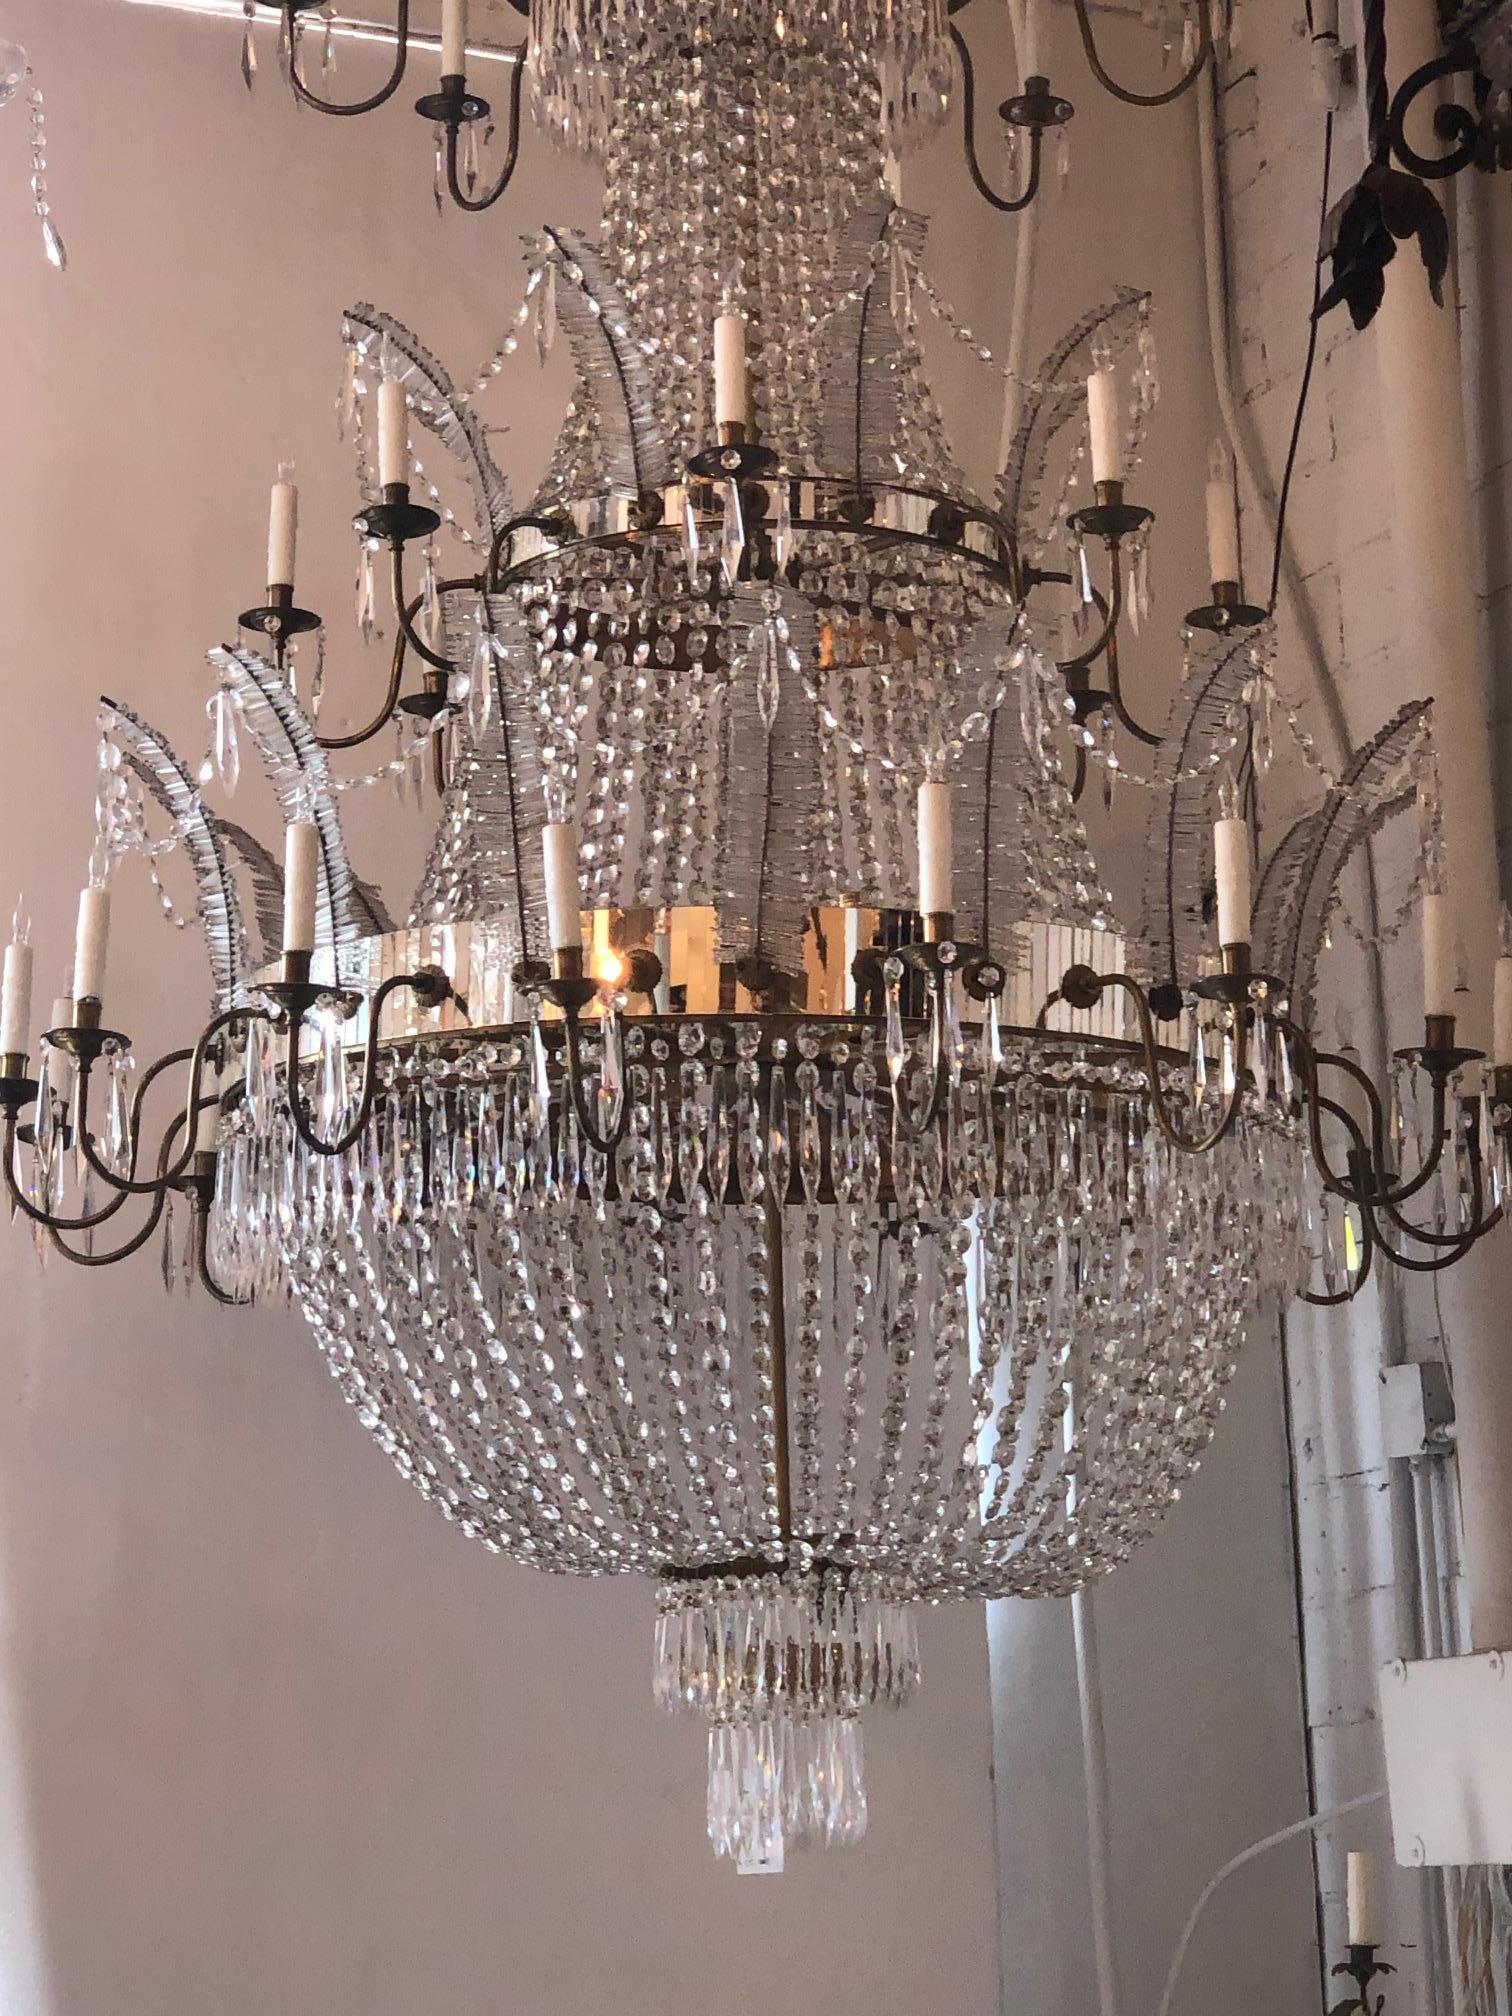 Large entry crystal chandelier, 30 lights with an unique and incredible design from the early 19th century.
Certified and ready to install.